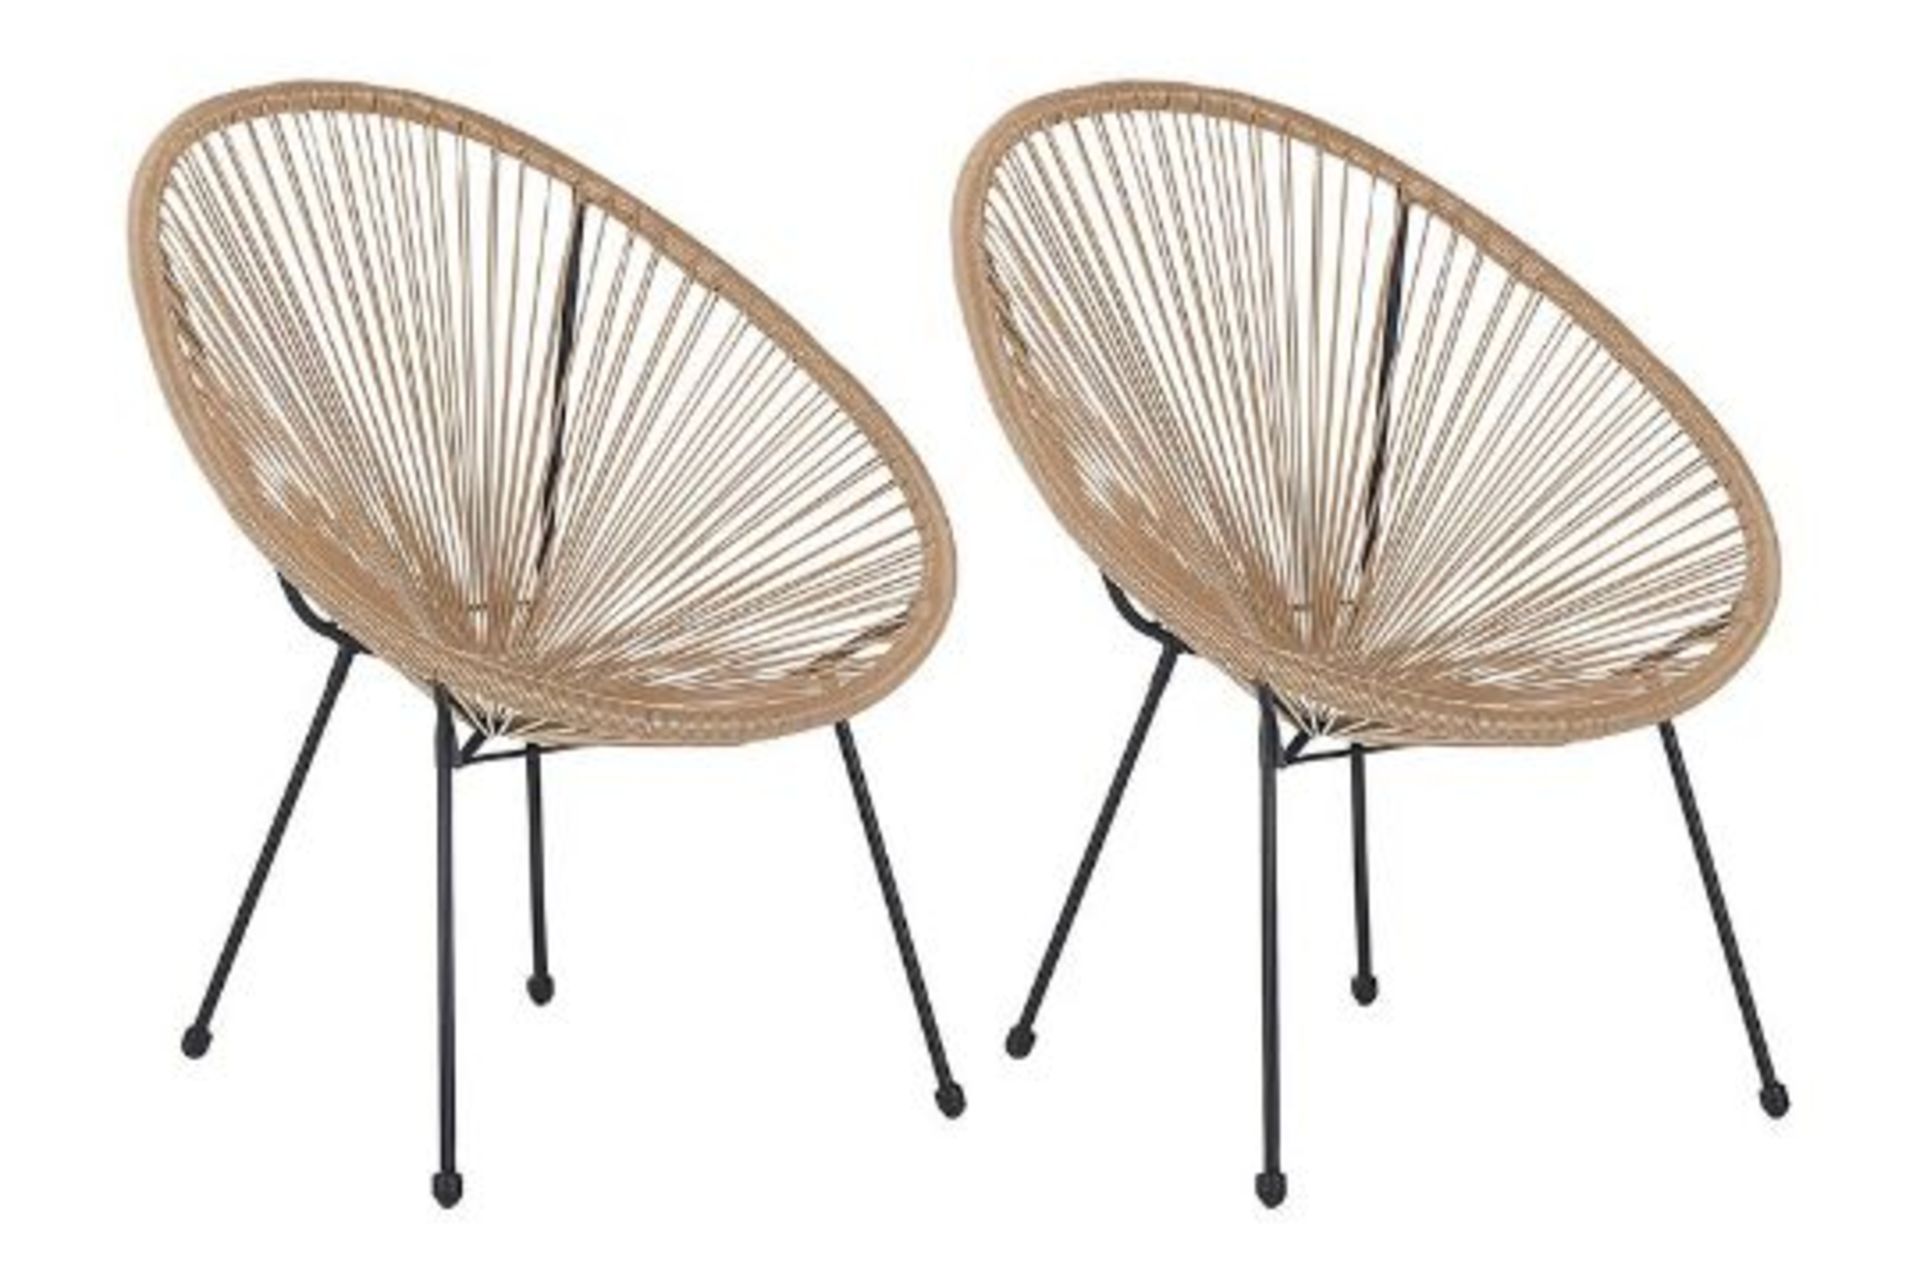 Acapulco Set of 2 PE Rattan Accent Chairs Natura 55/12l. - ER24. RRP £489.99. This 2-piece chair set